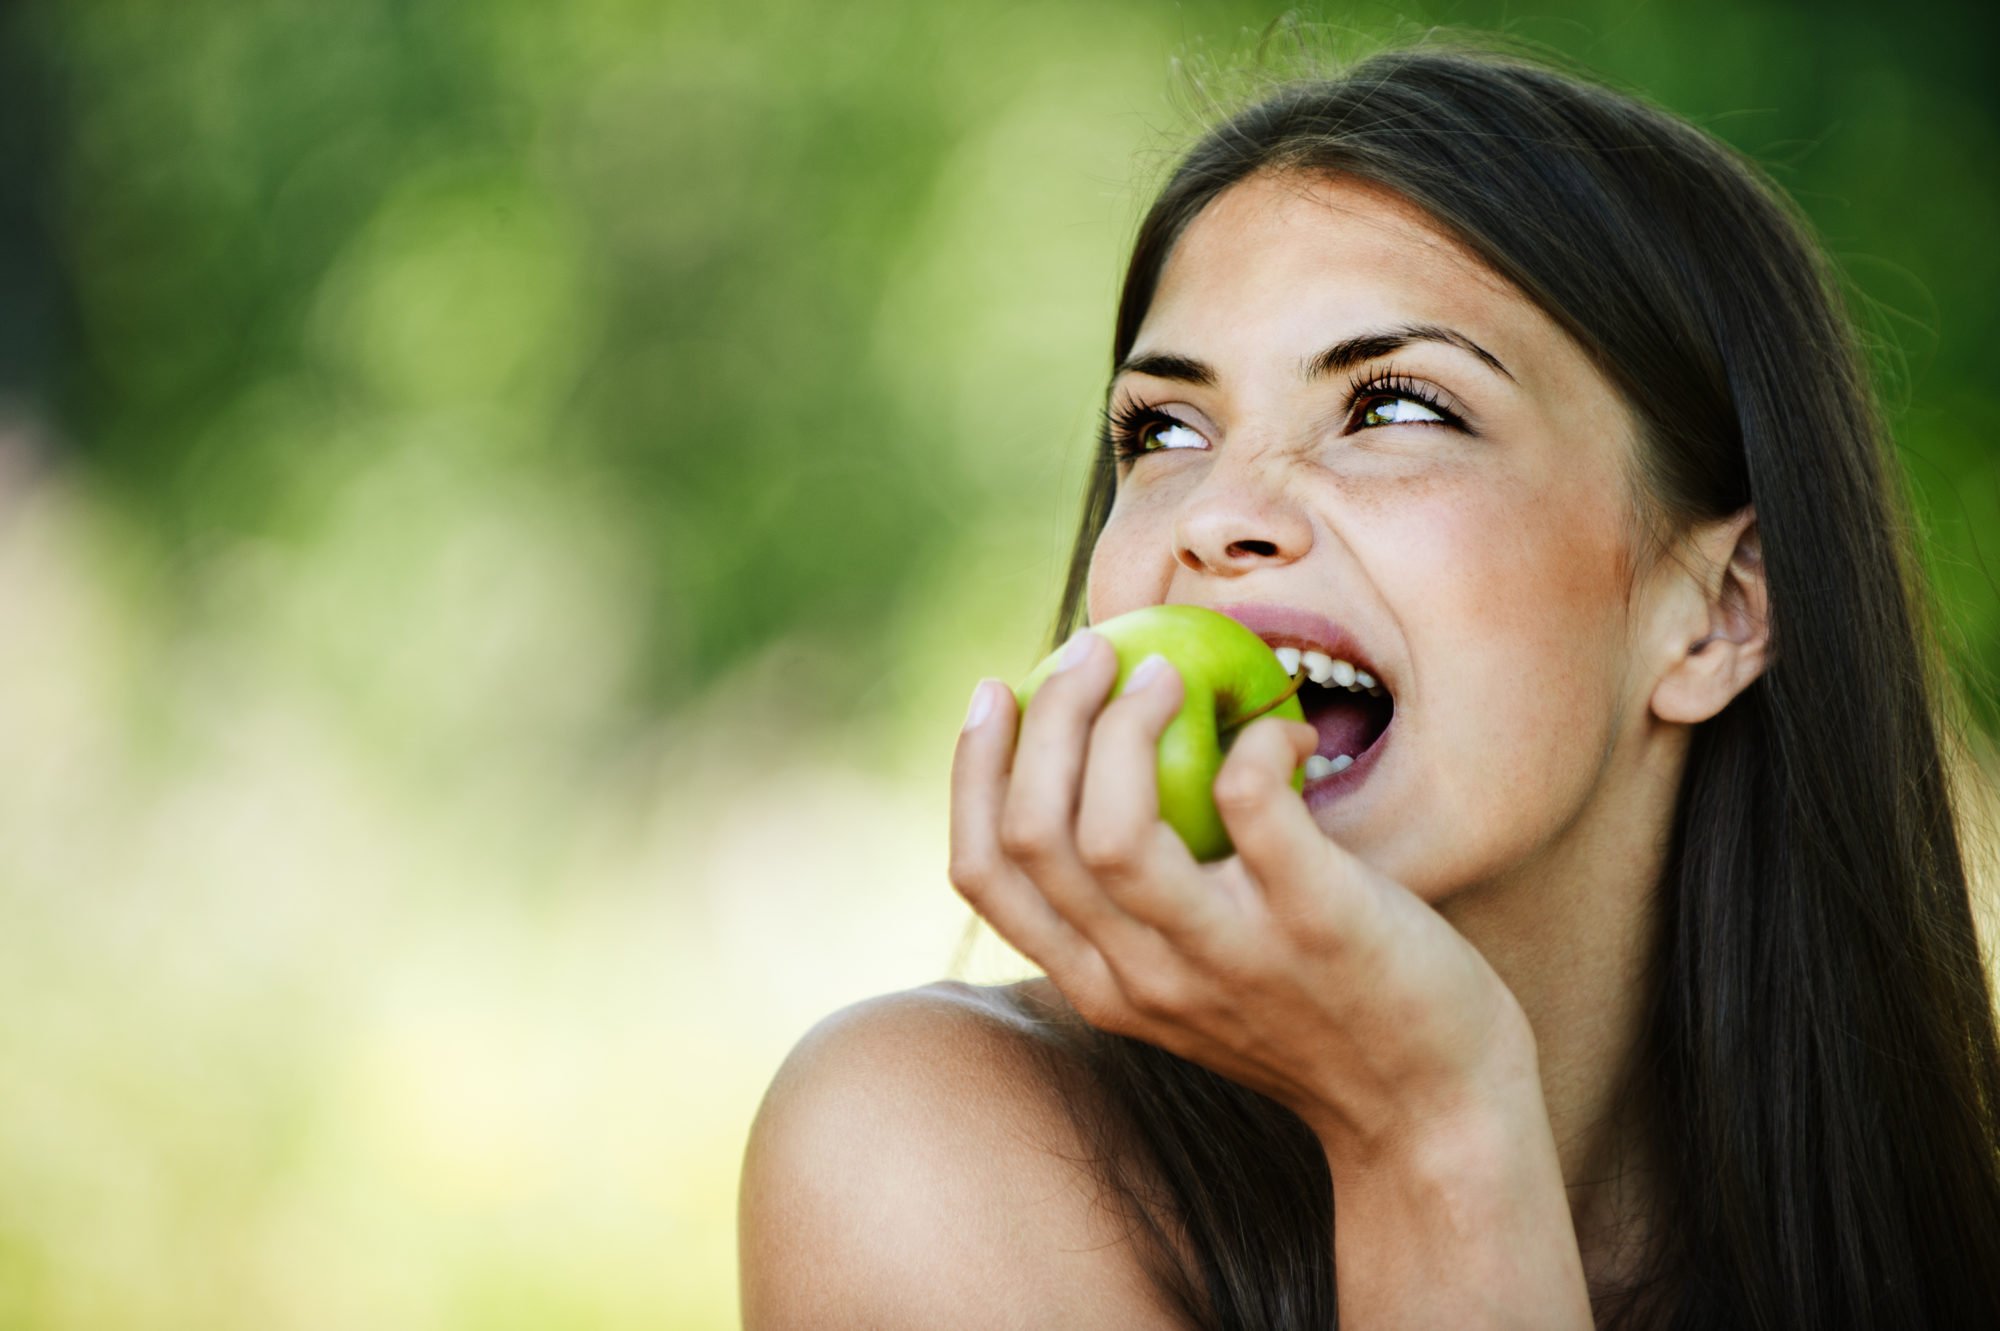 Feeling Snacky? Try These 7 Healthy Snacking Tips